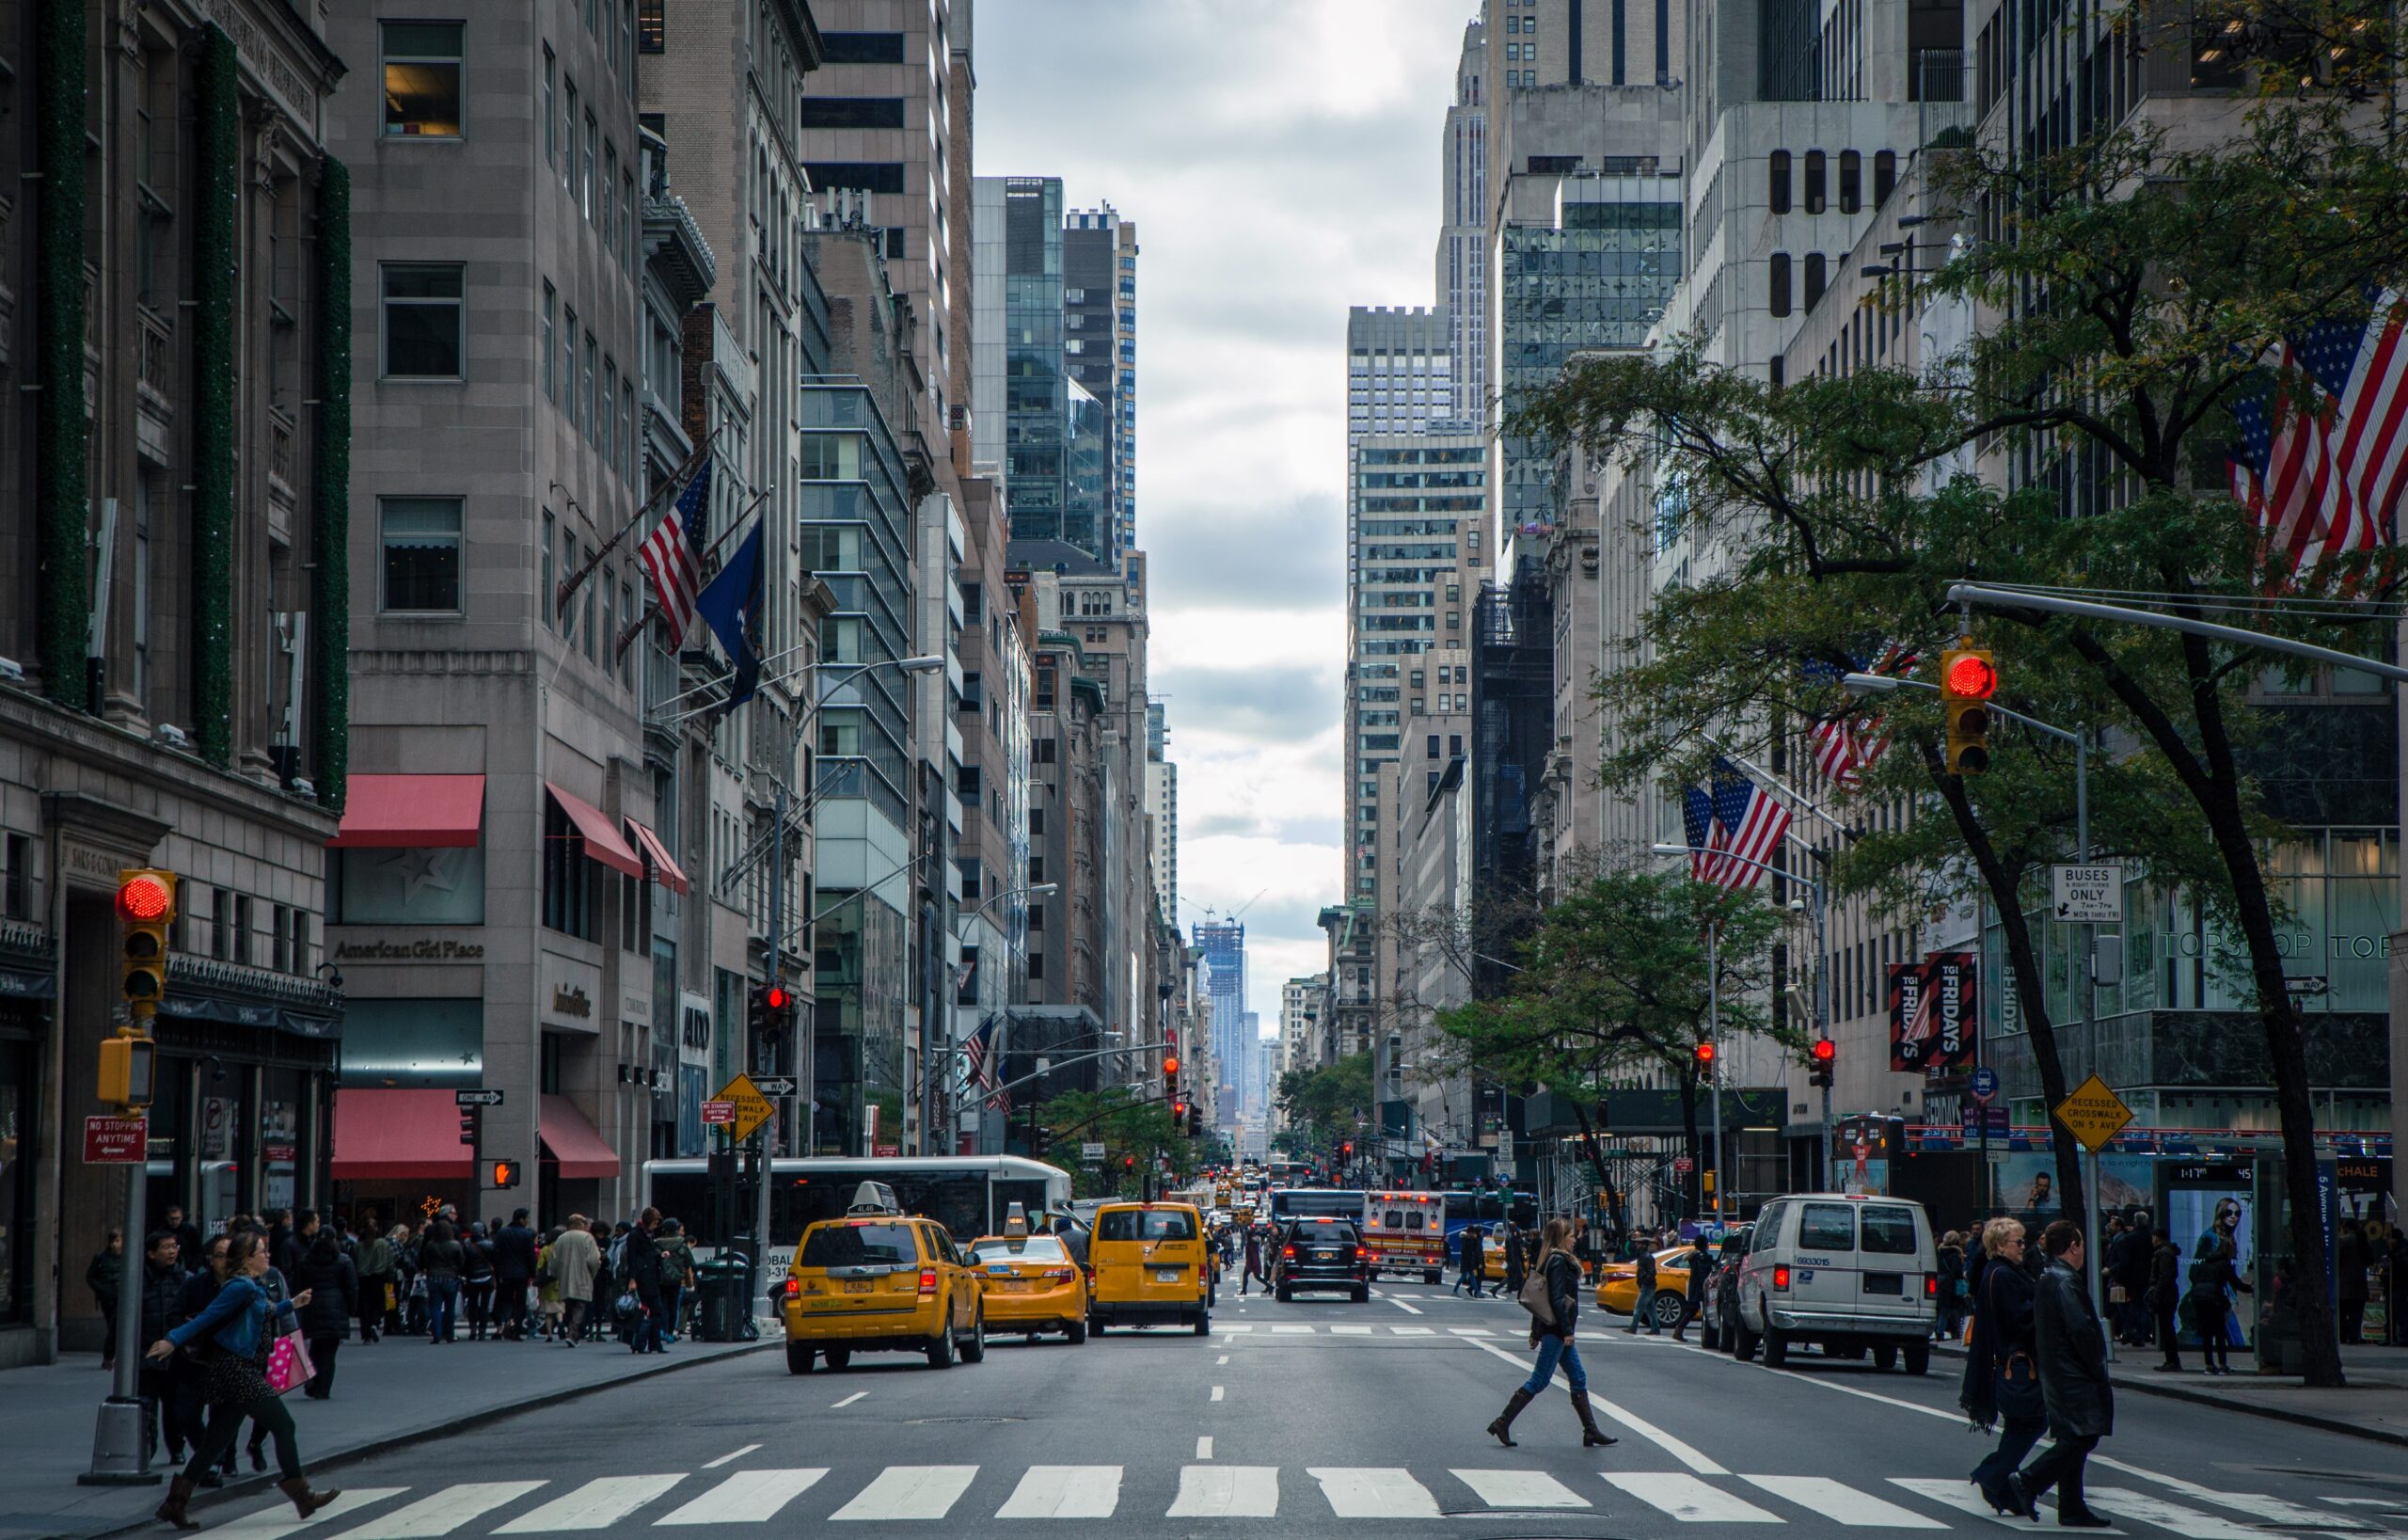 A bustling city street in New York, featuring tall buildings, pedestrians, yellow taxis, and American flags. The sky is overcast and traffic lights are red, with vehicles and people crossing the zebra-pattered intersection.